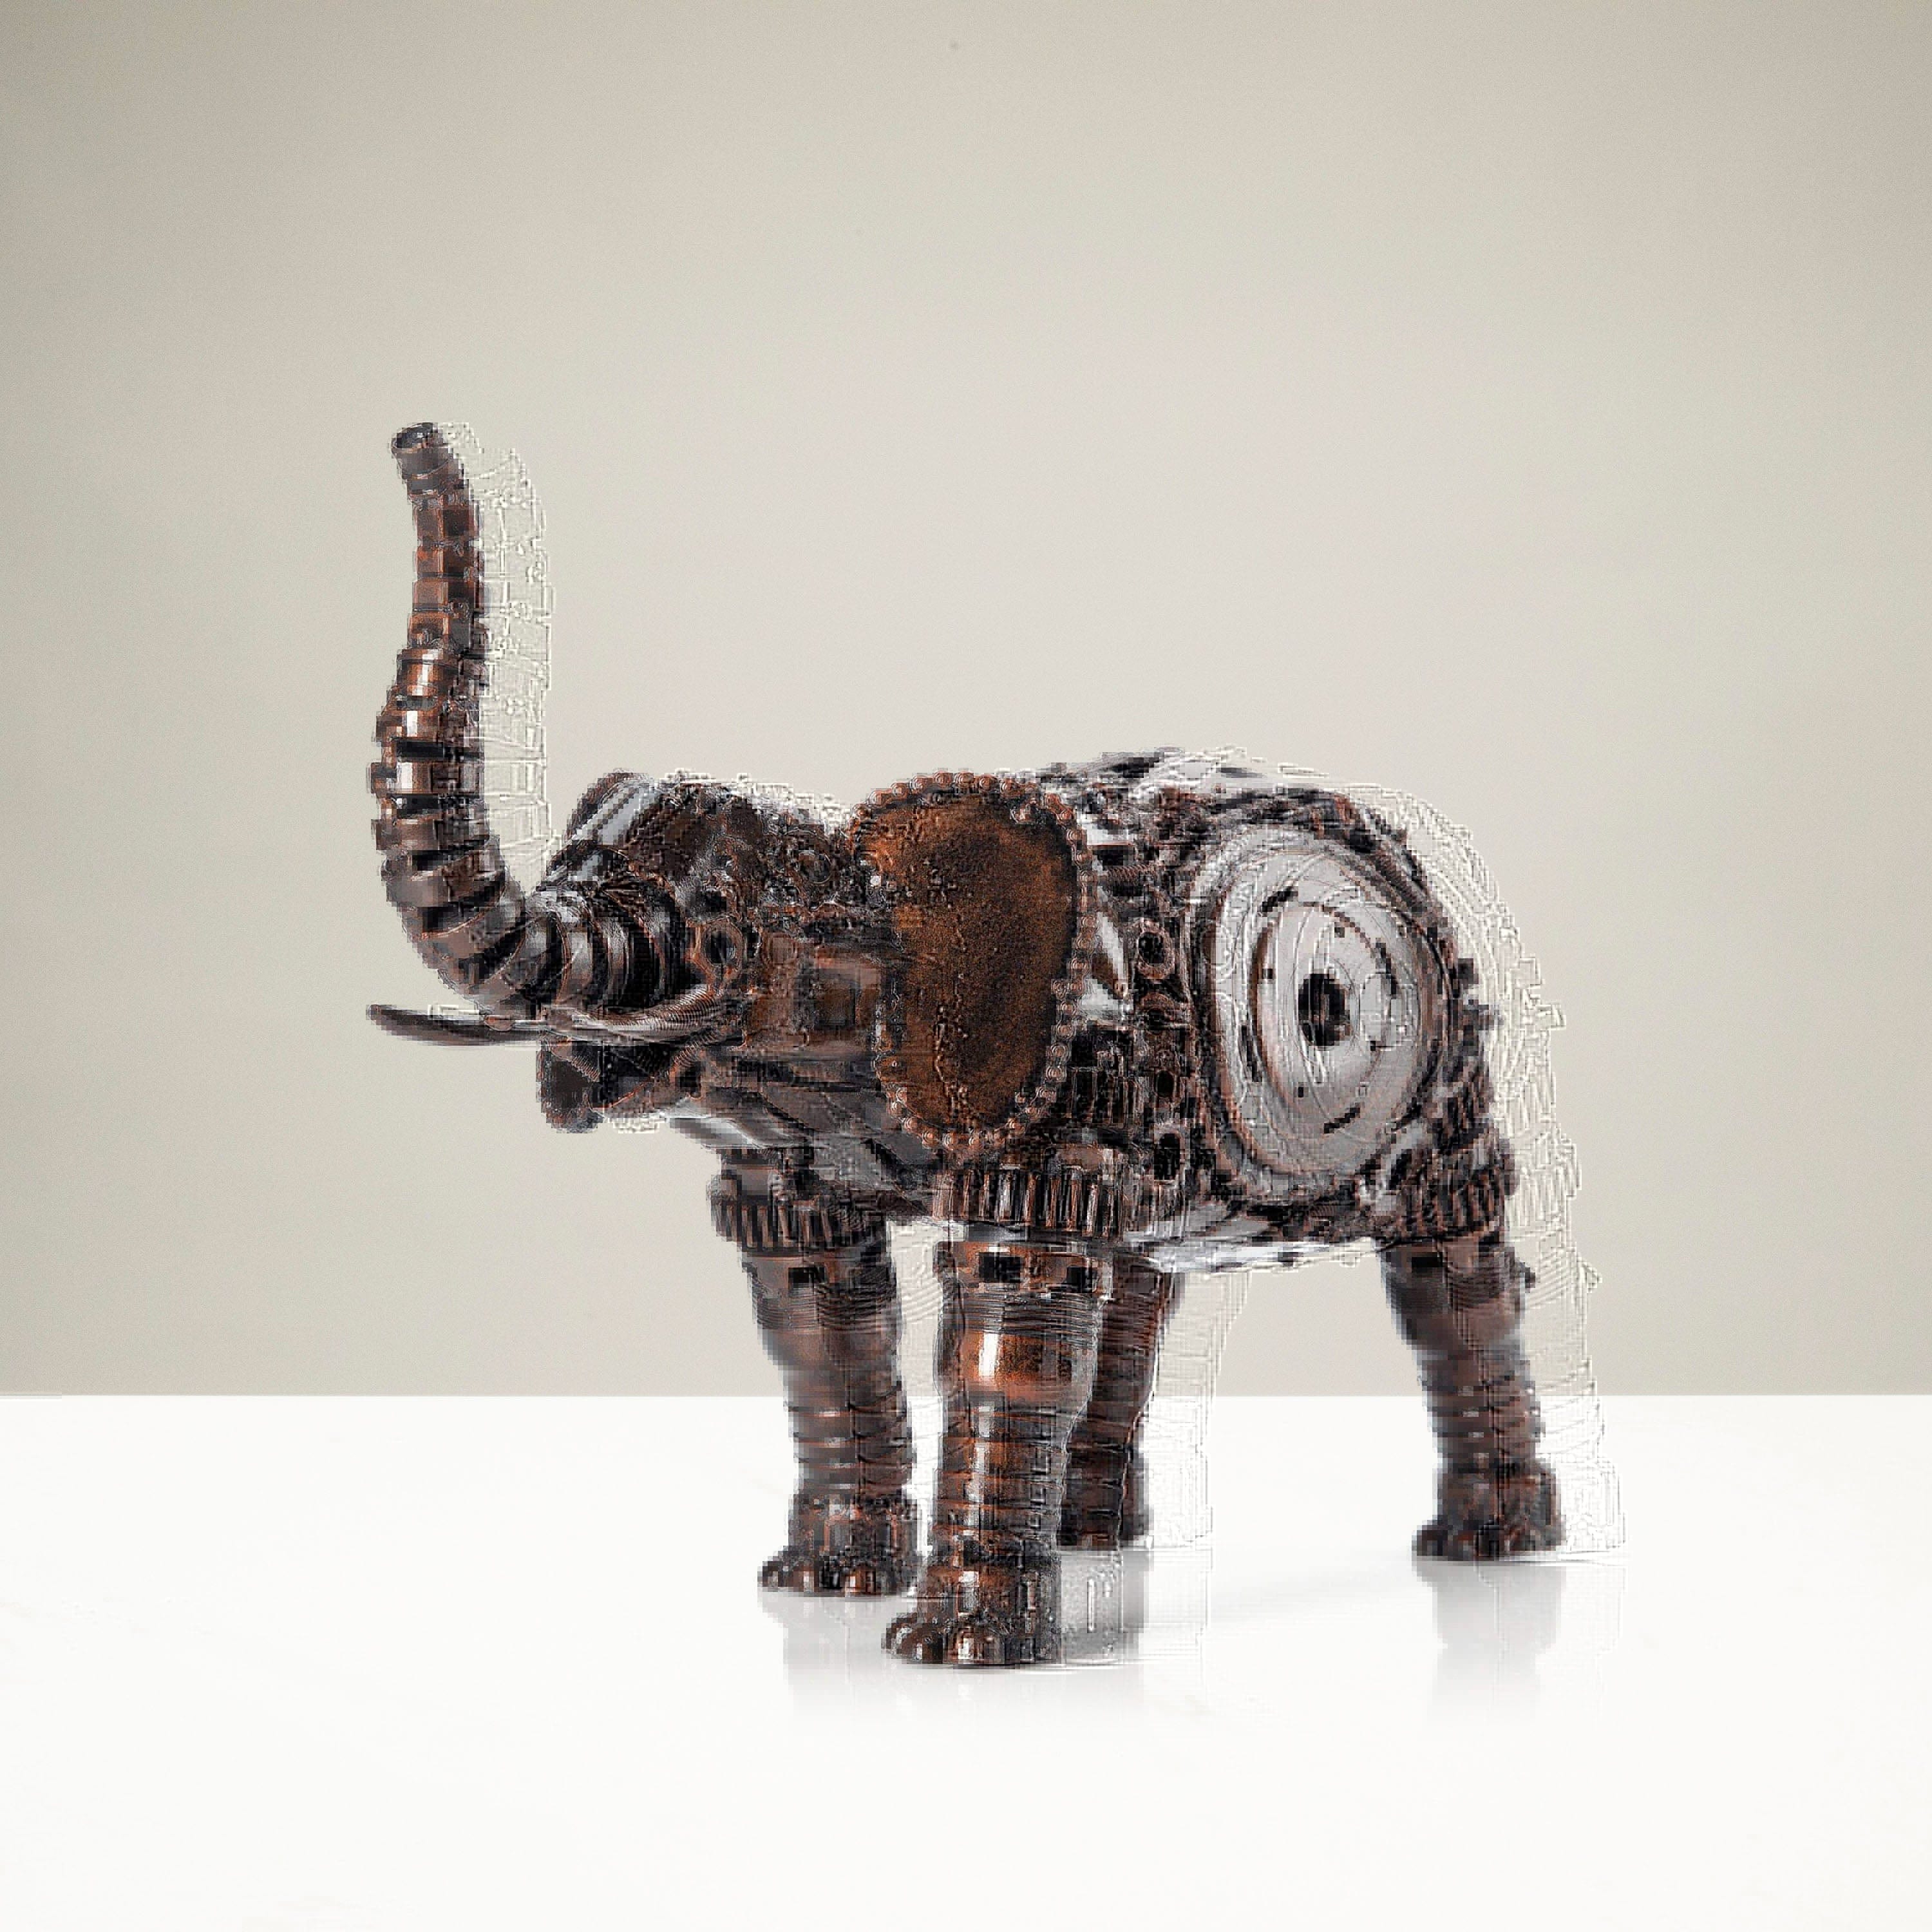 Kalifano Recycled Metal Art Elephant Bronze Inspired Recycled Metal Sculpture Original, One-of-a-Kind Work of Art RMS-2500EB-N